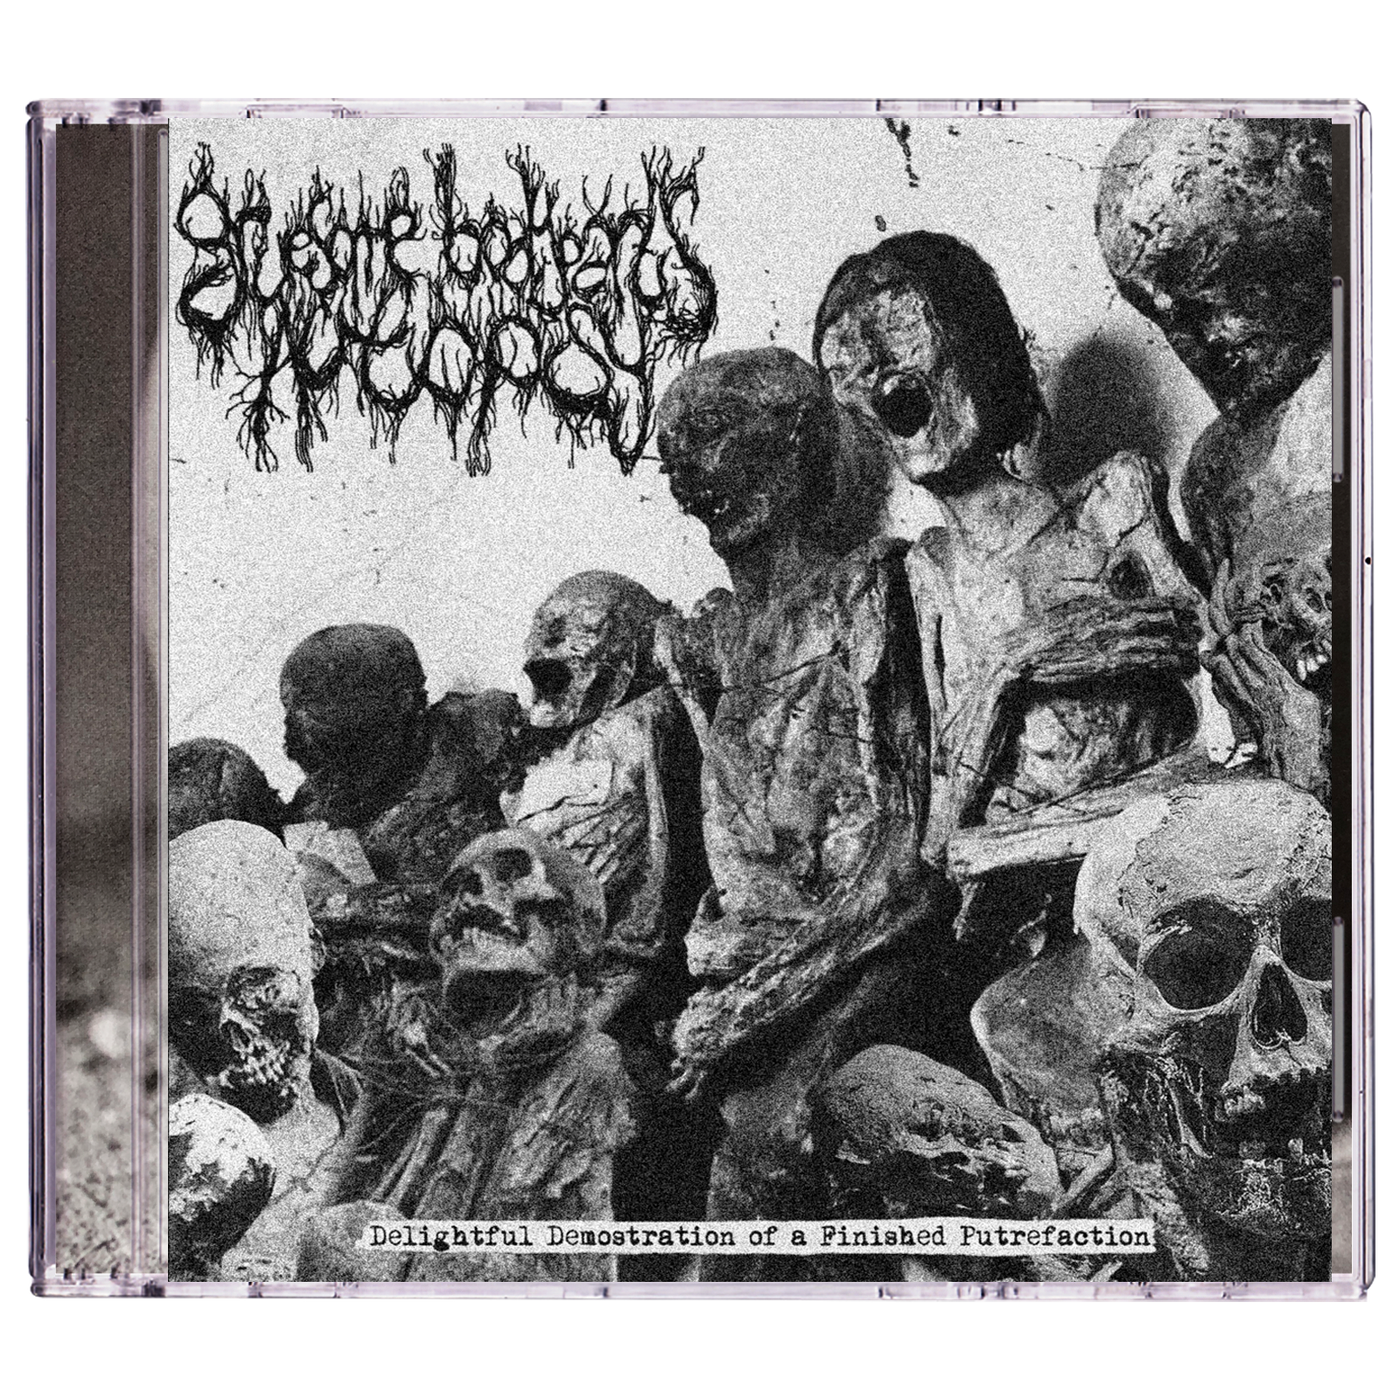 Gruesome Bodyparts Autopsy 'Delightful Demonstration Of A Finished Putrefaction' CD